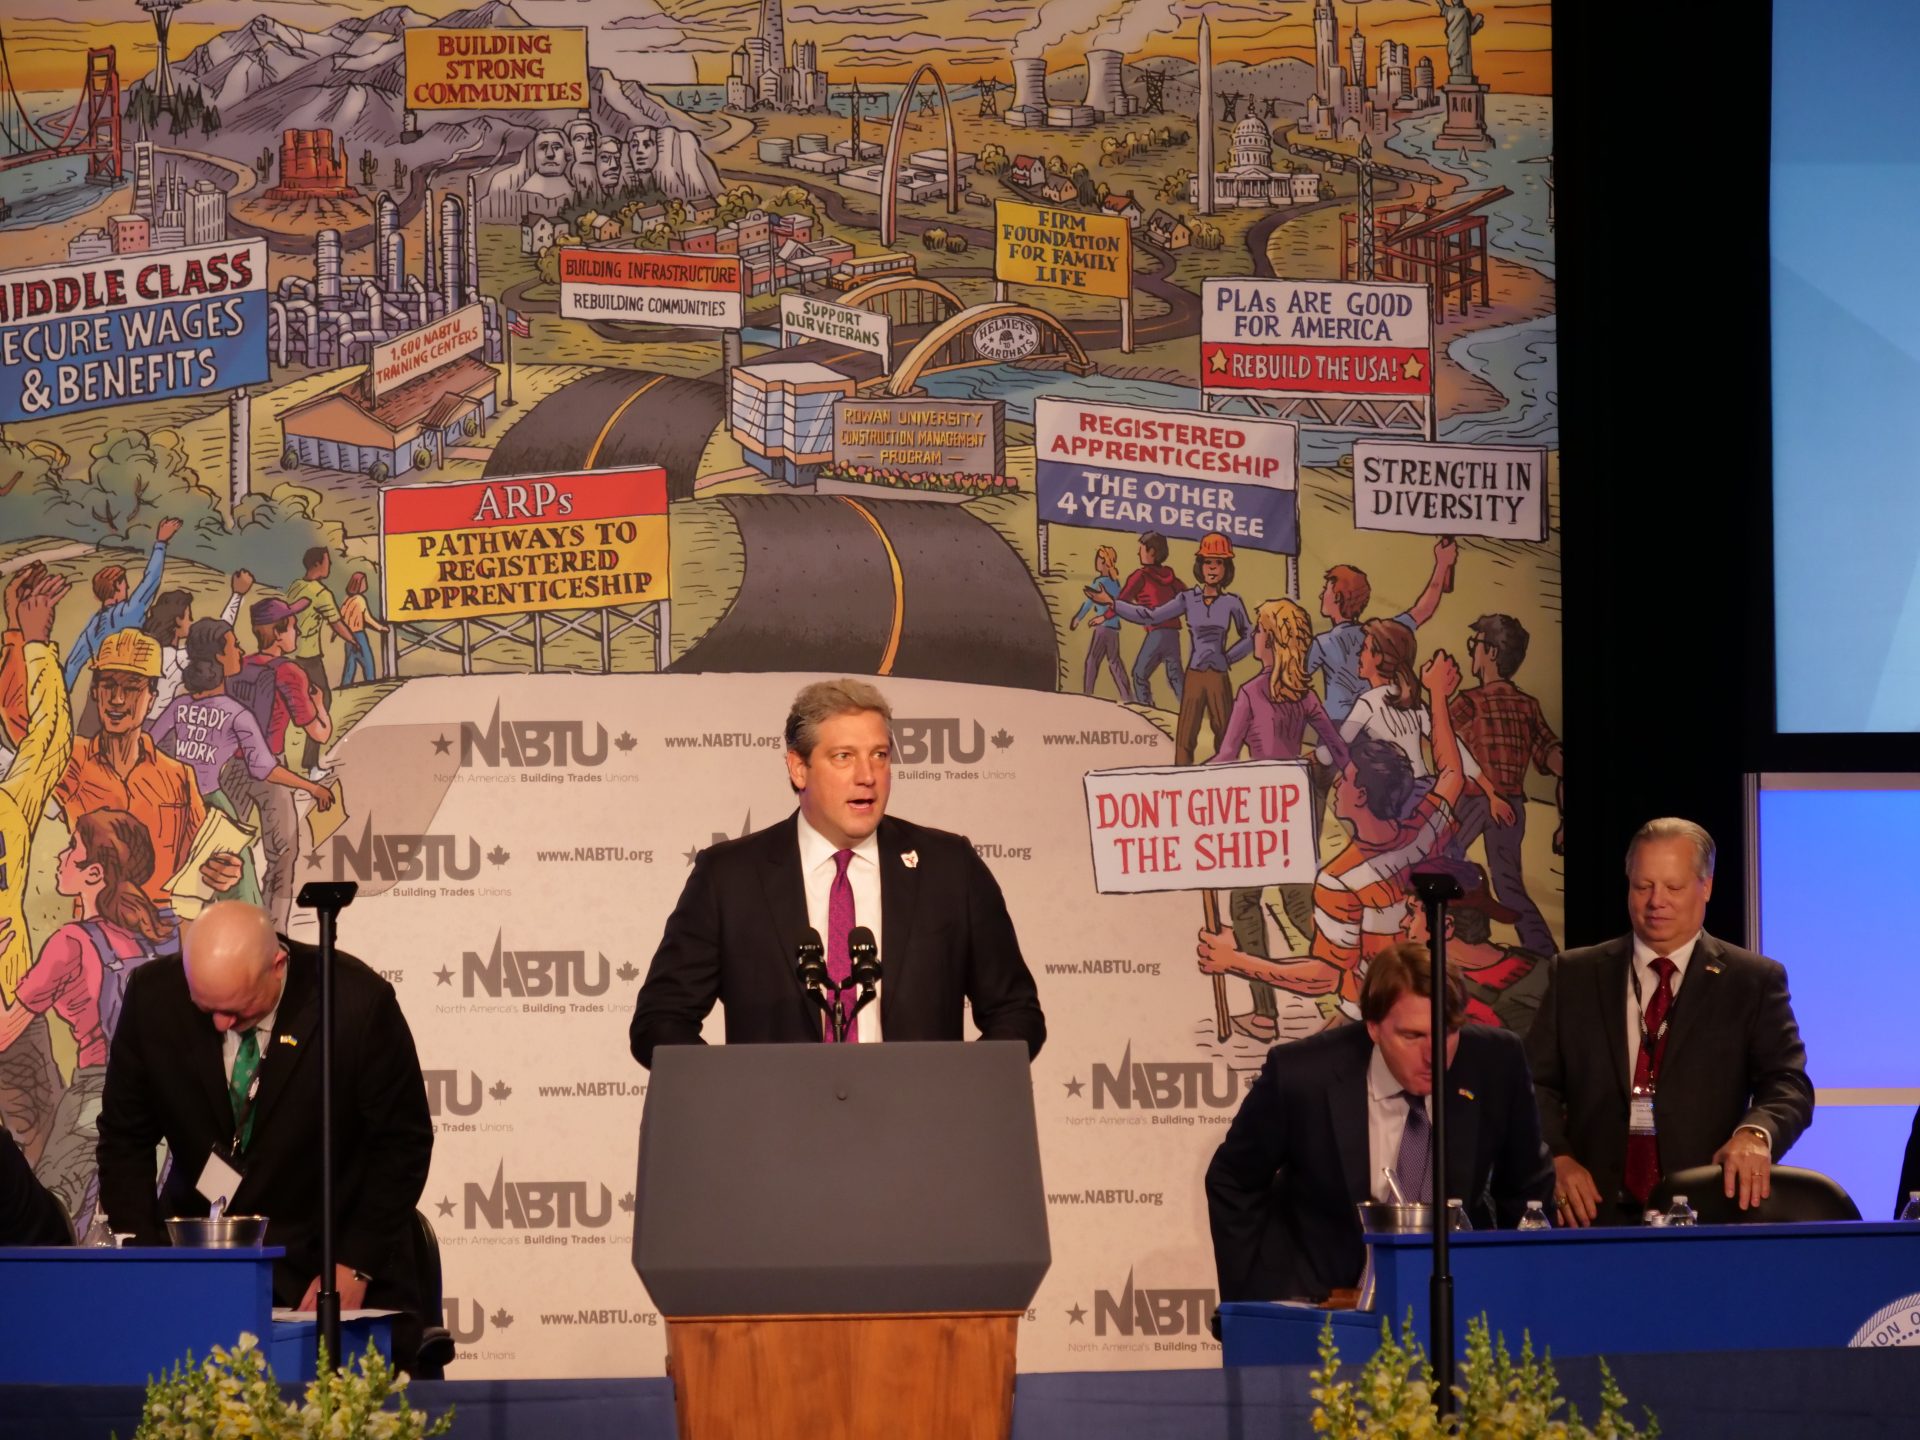 Image from the Gallery: NABTU Conference – Washington, D.C.